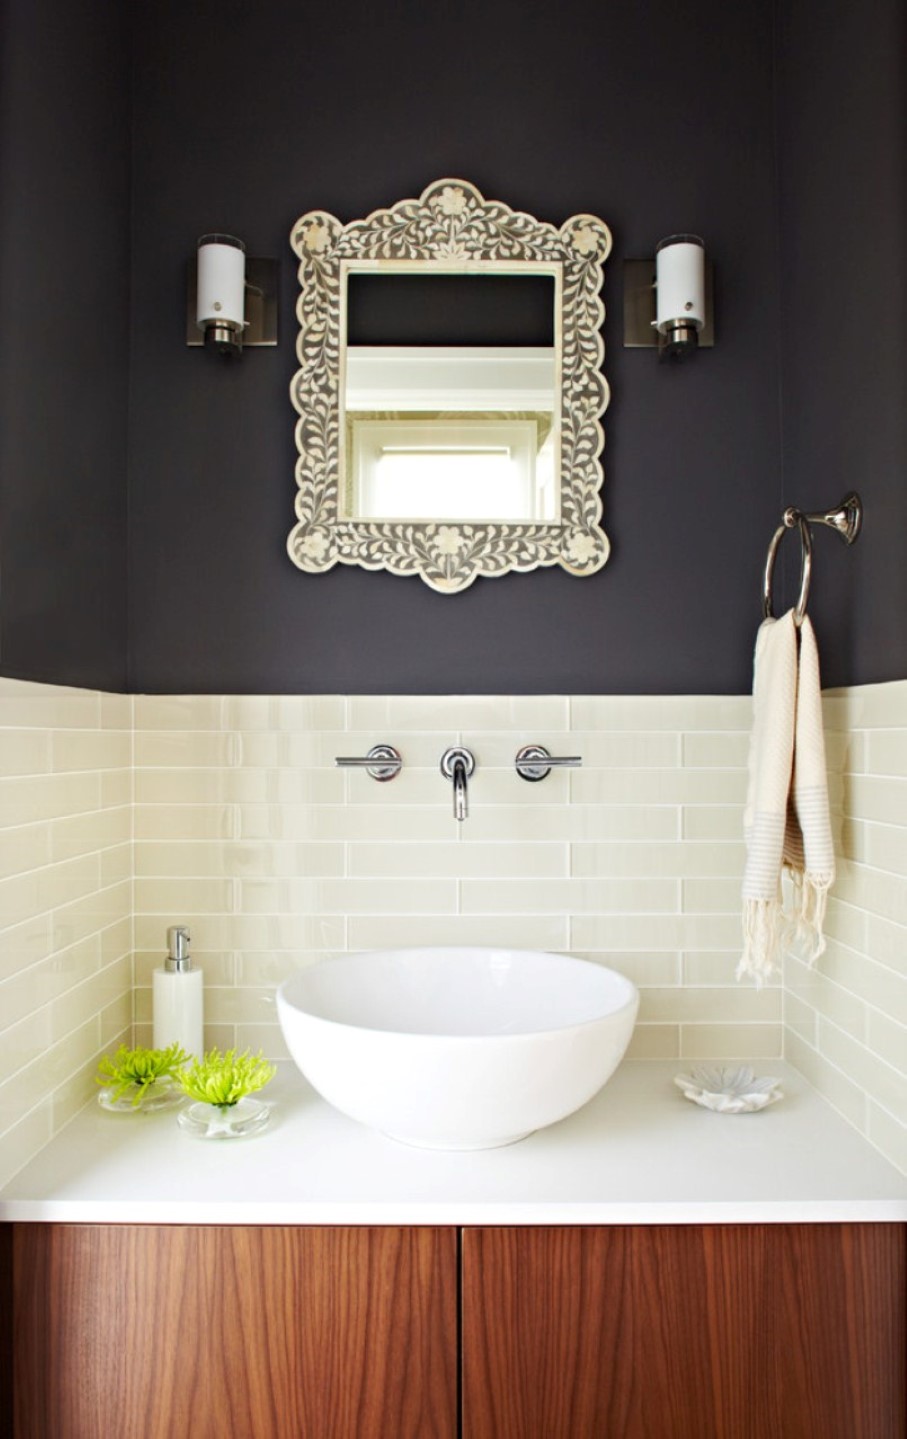 Room Idea Mirror Powder Room Idea Featured Unusual Mirror Frame Also Wall Mount Faucet Design And Pretty Washbowl Bathroom  Inspiring Wall Mount Faucets In Comely Bathrooms 